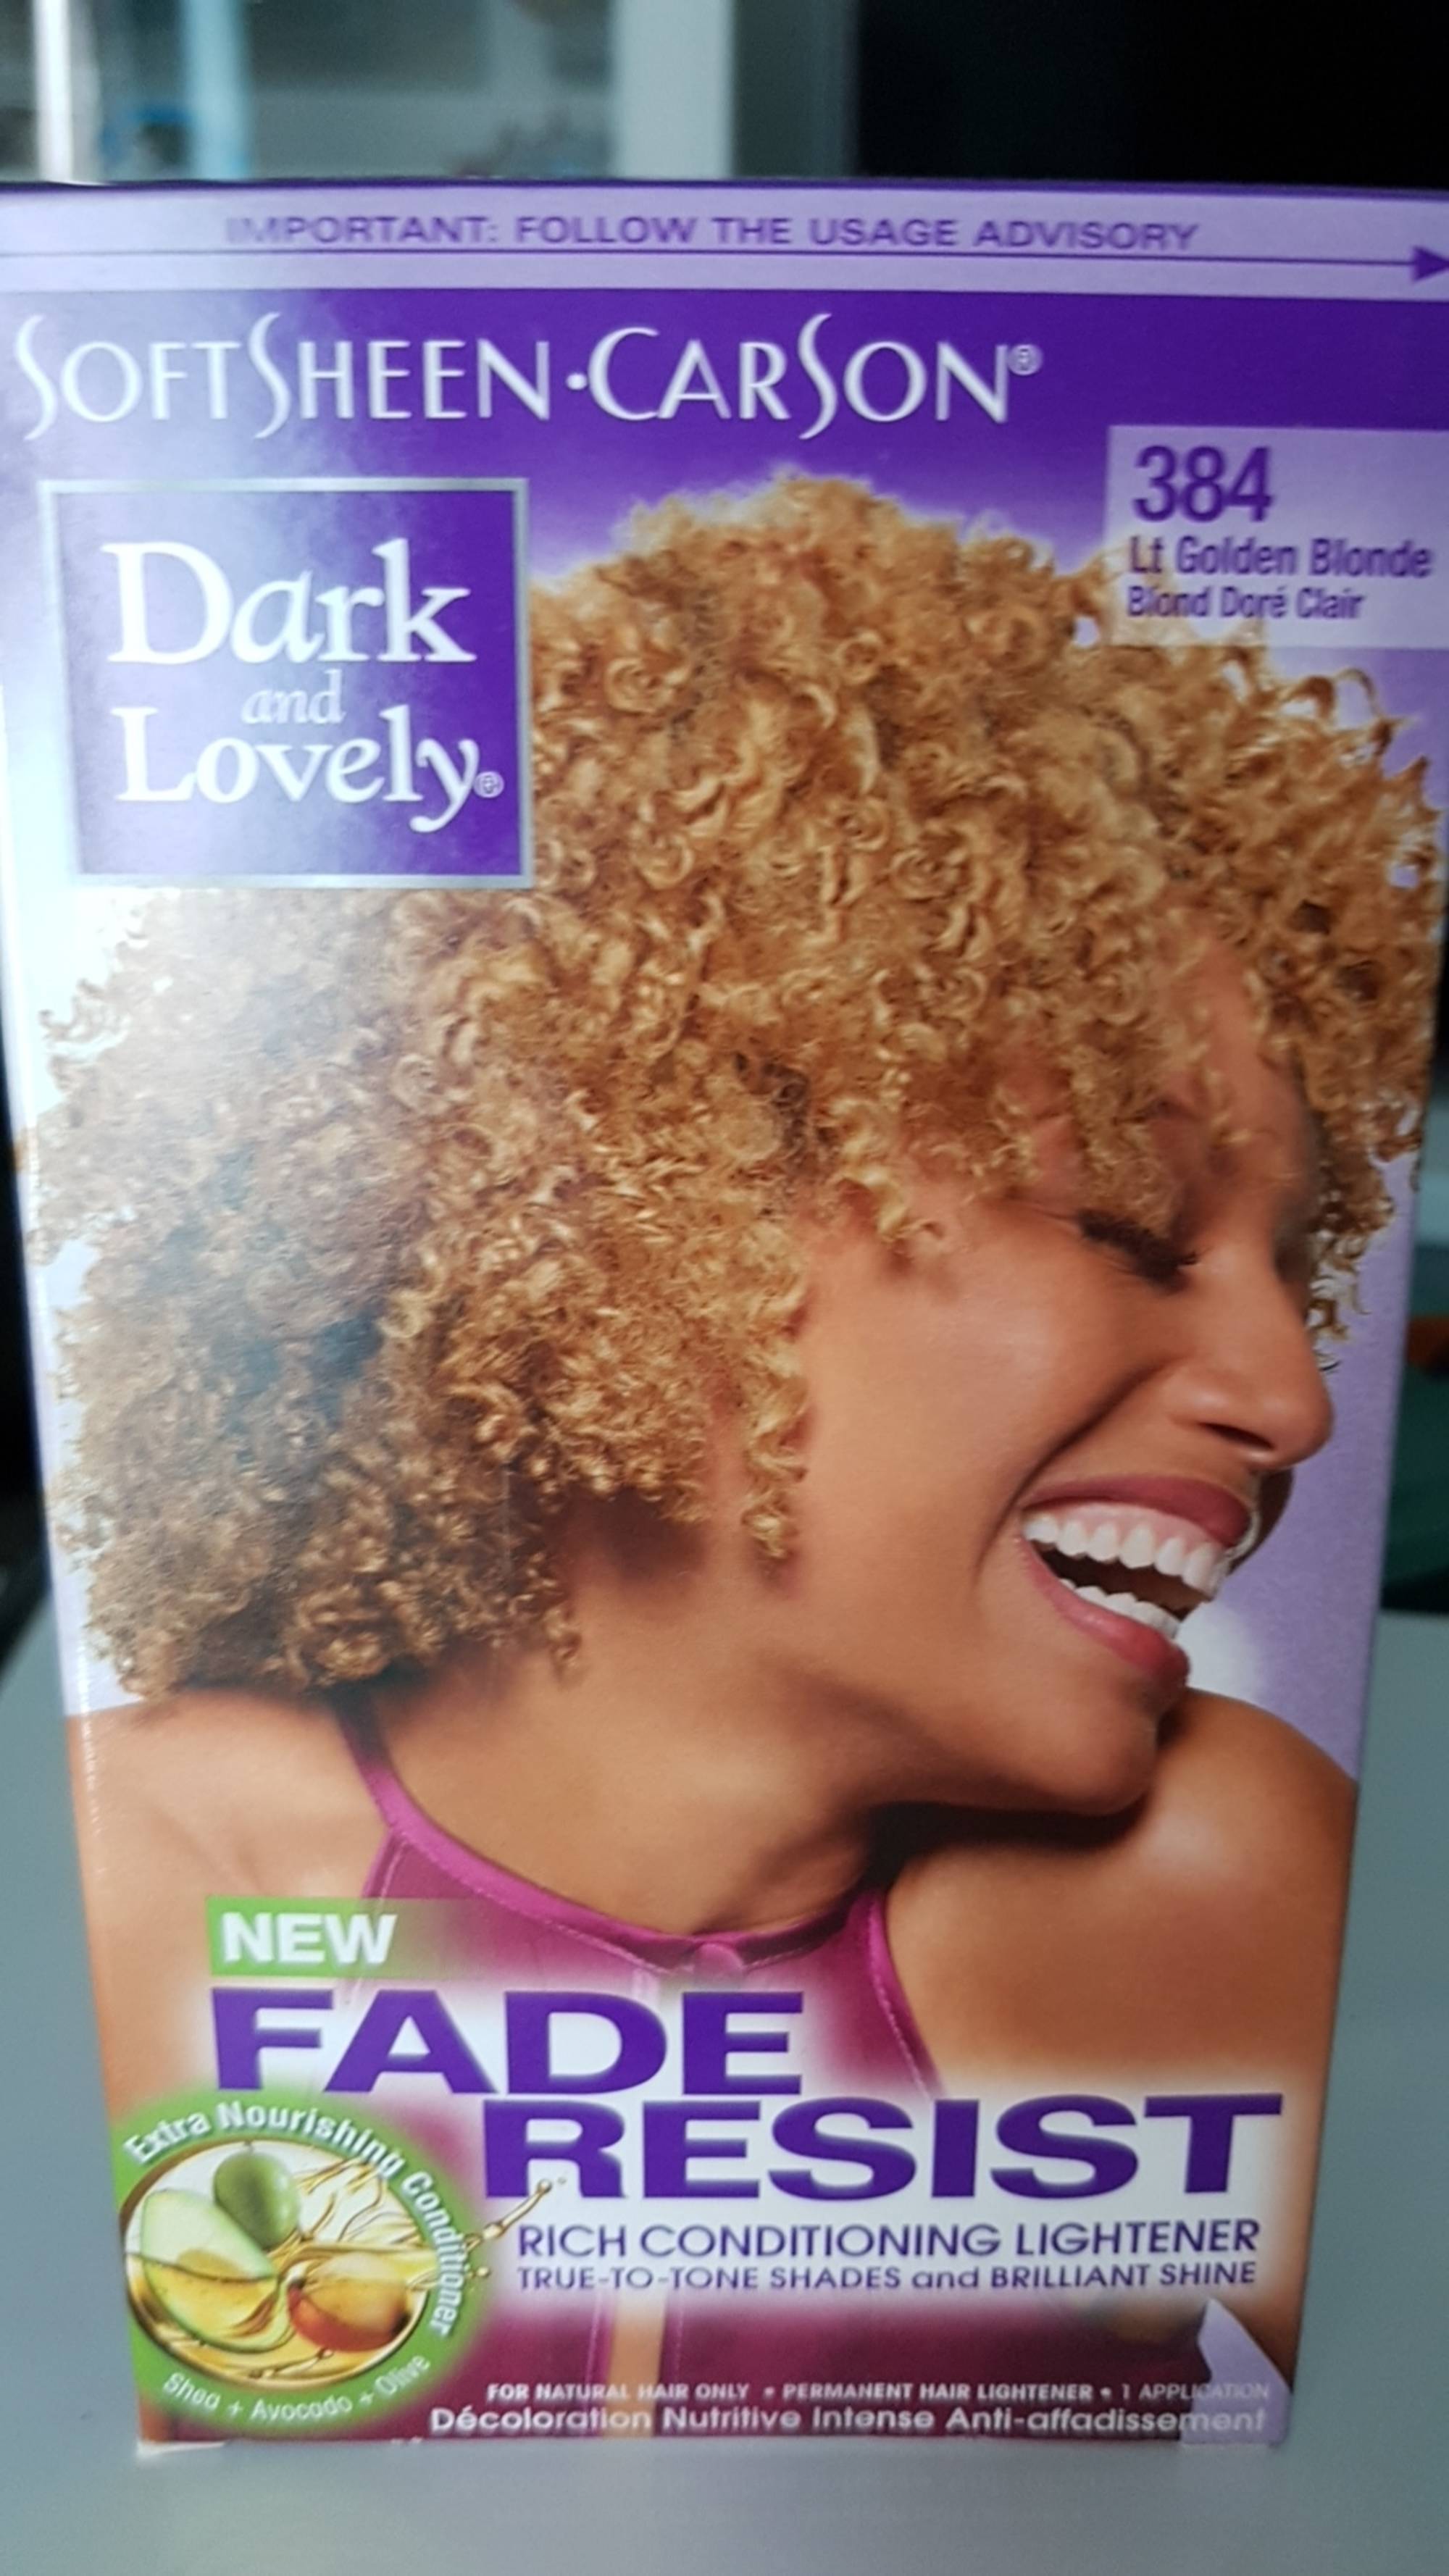 DARK AND LOVELY - Fade resist - Décoloration nutritive intense 384 blond doré clair